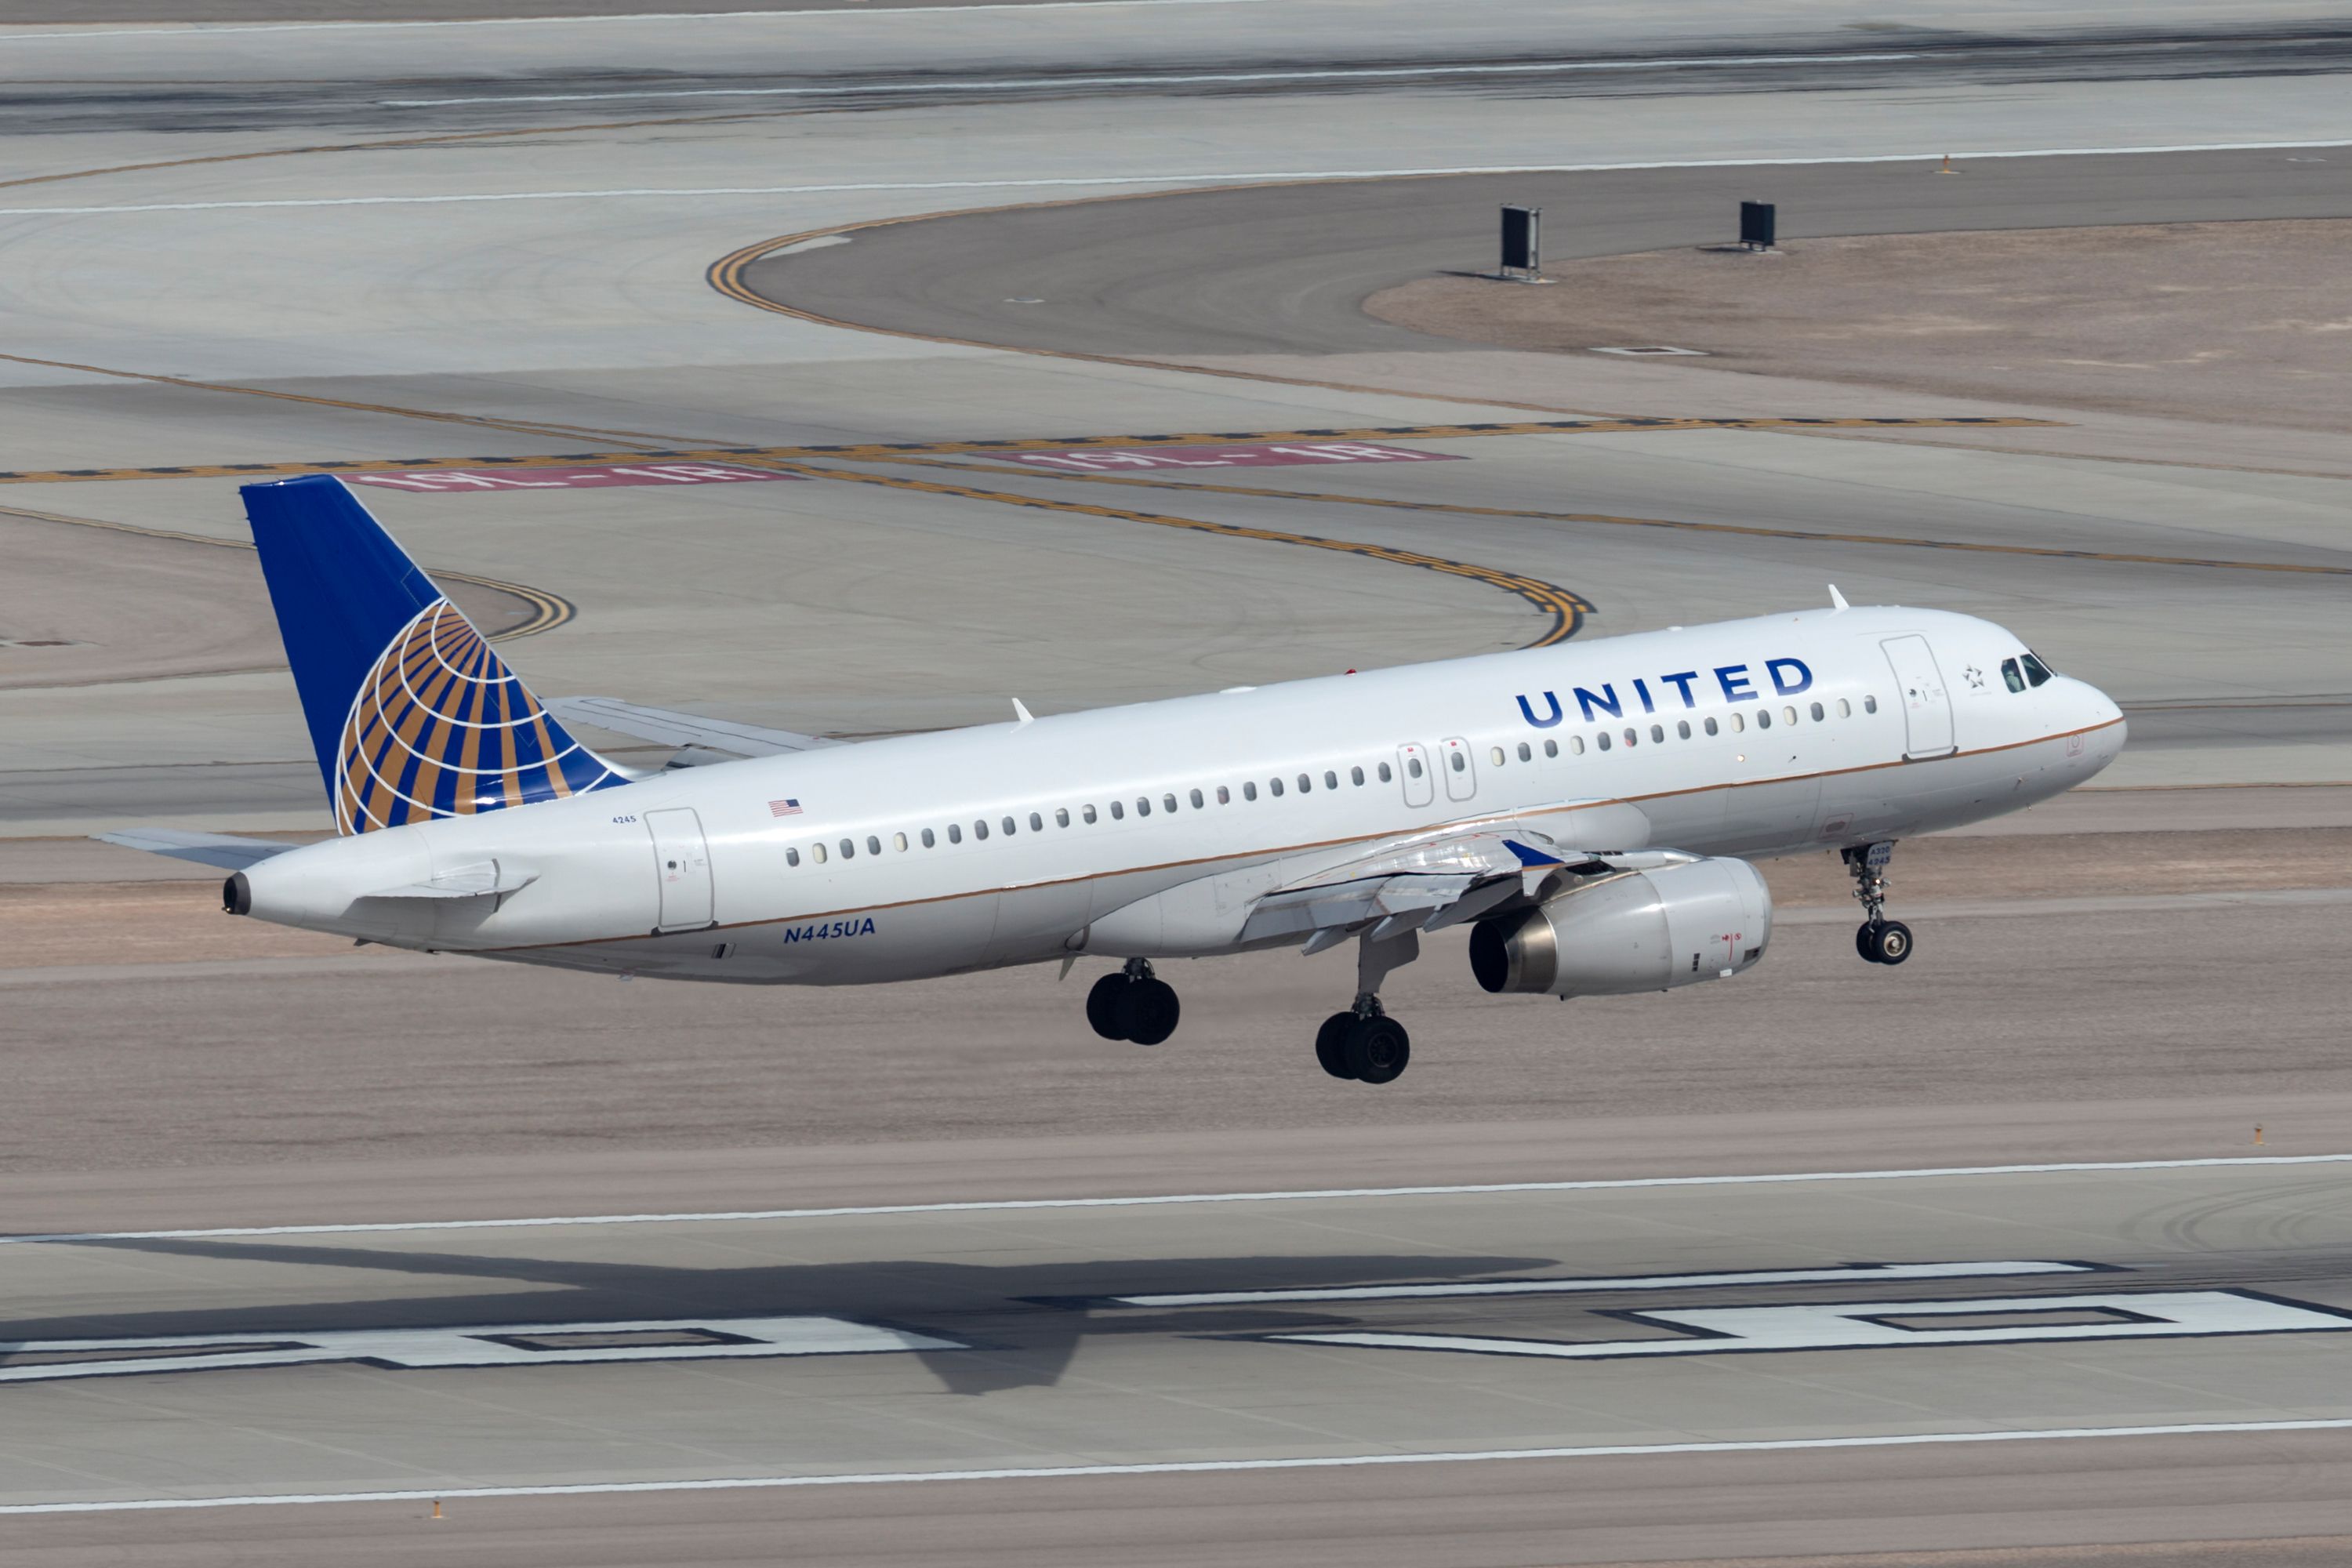 Las Vegas, Nevada, USA - May 5, 2013: United Airlines Airbus A320 airliner on approach to land at McCarran International Airport in Las Vegas.